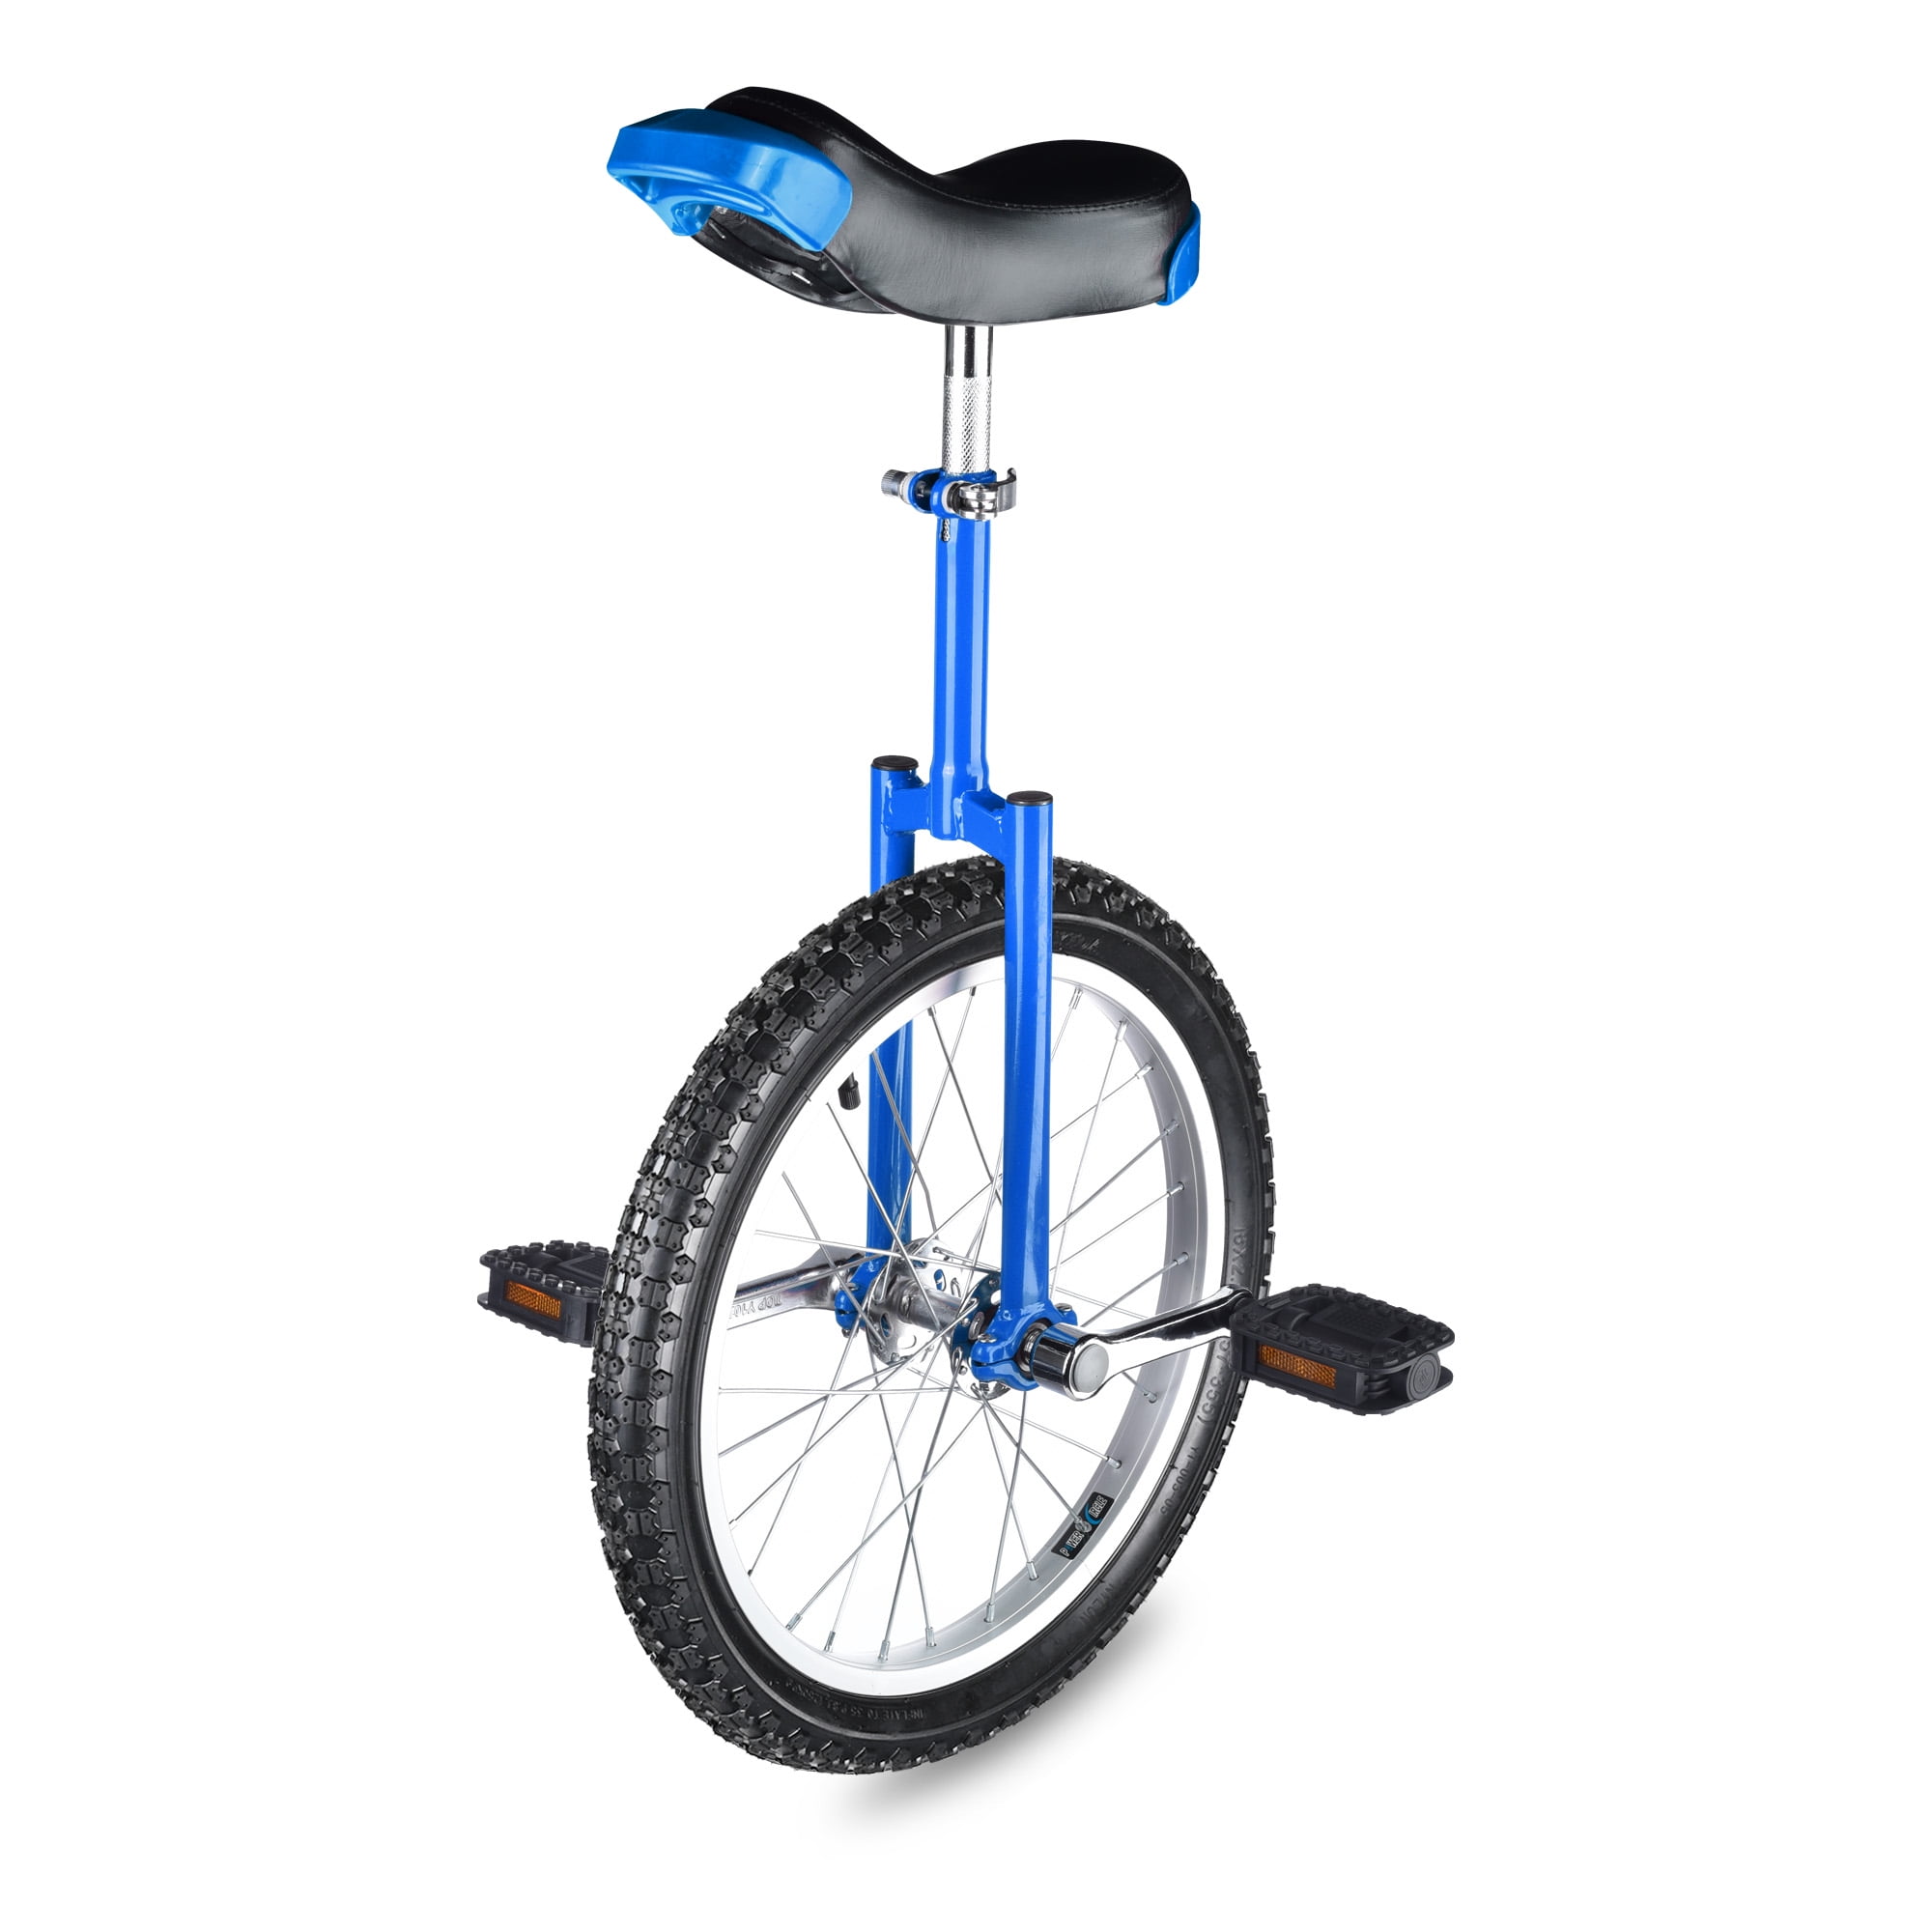 24" Black Unicycle Cycling Scooter Circus Bike Skidproof Tire Balance Exercise 